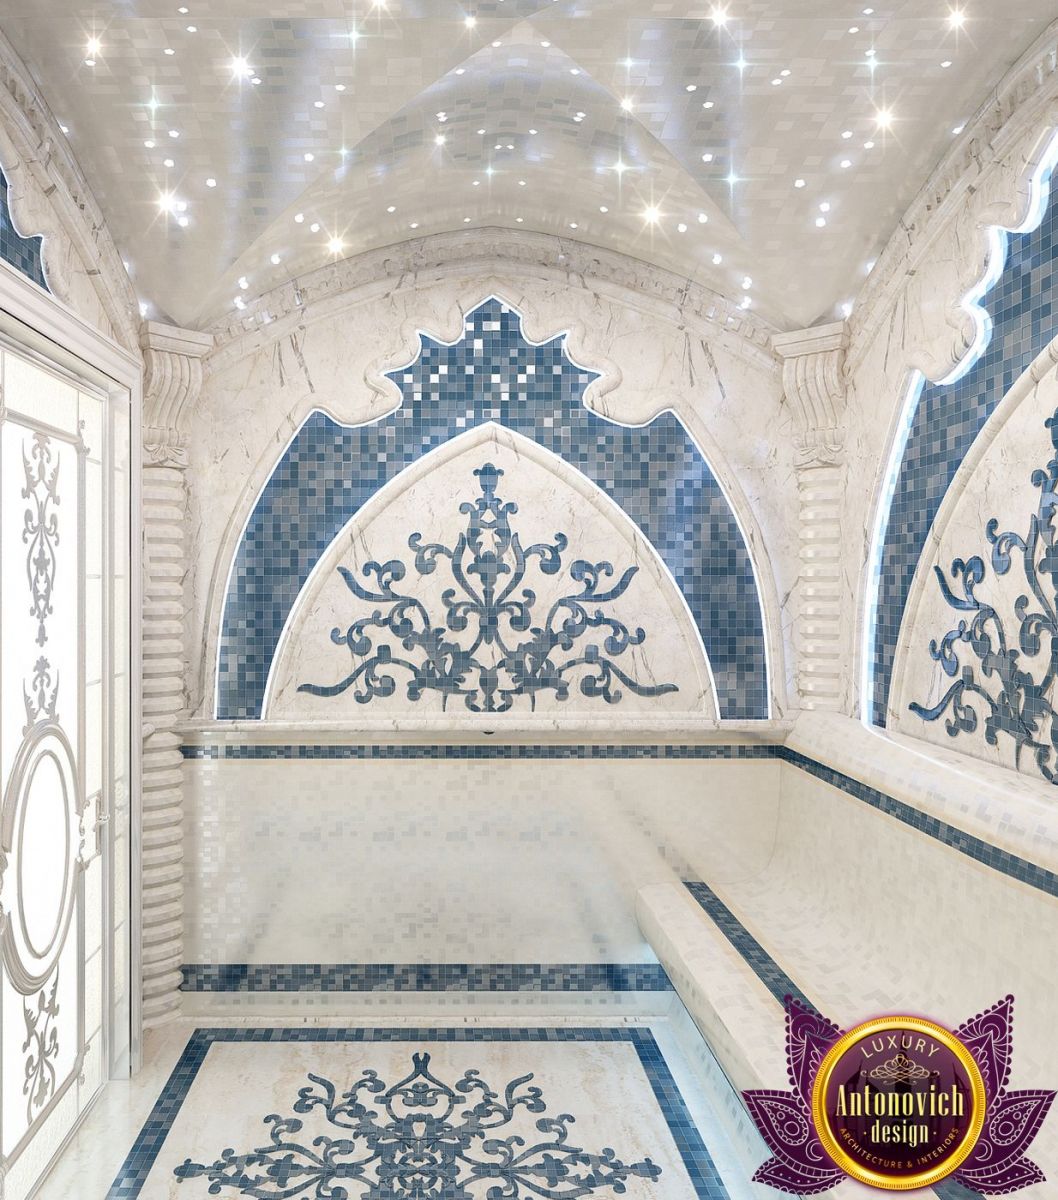 Traditional Turkish hamam design with domed ceiling